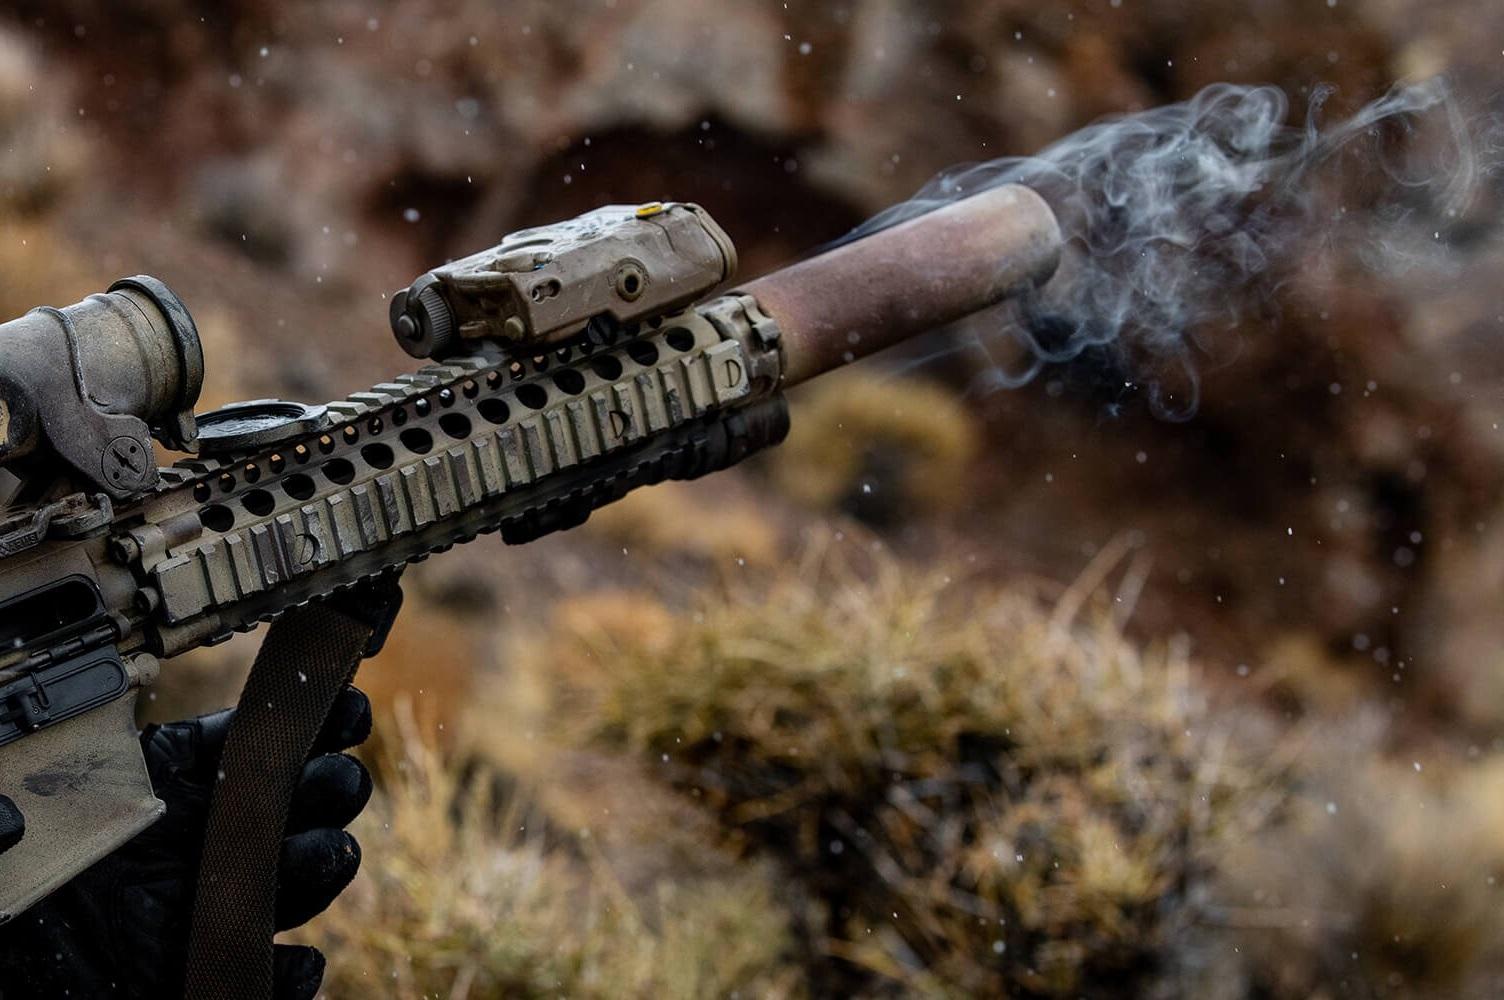 SureFire suppressors are trusted by elite military forces around the world. They deliver an unsurpassed combination of sound attenuation, muzzle flash reduction and dust signature mitigation.